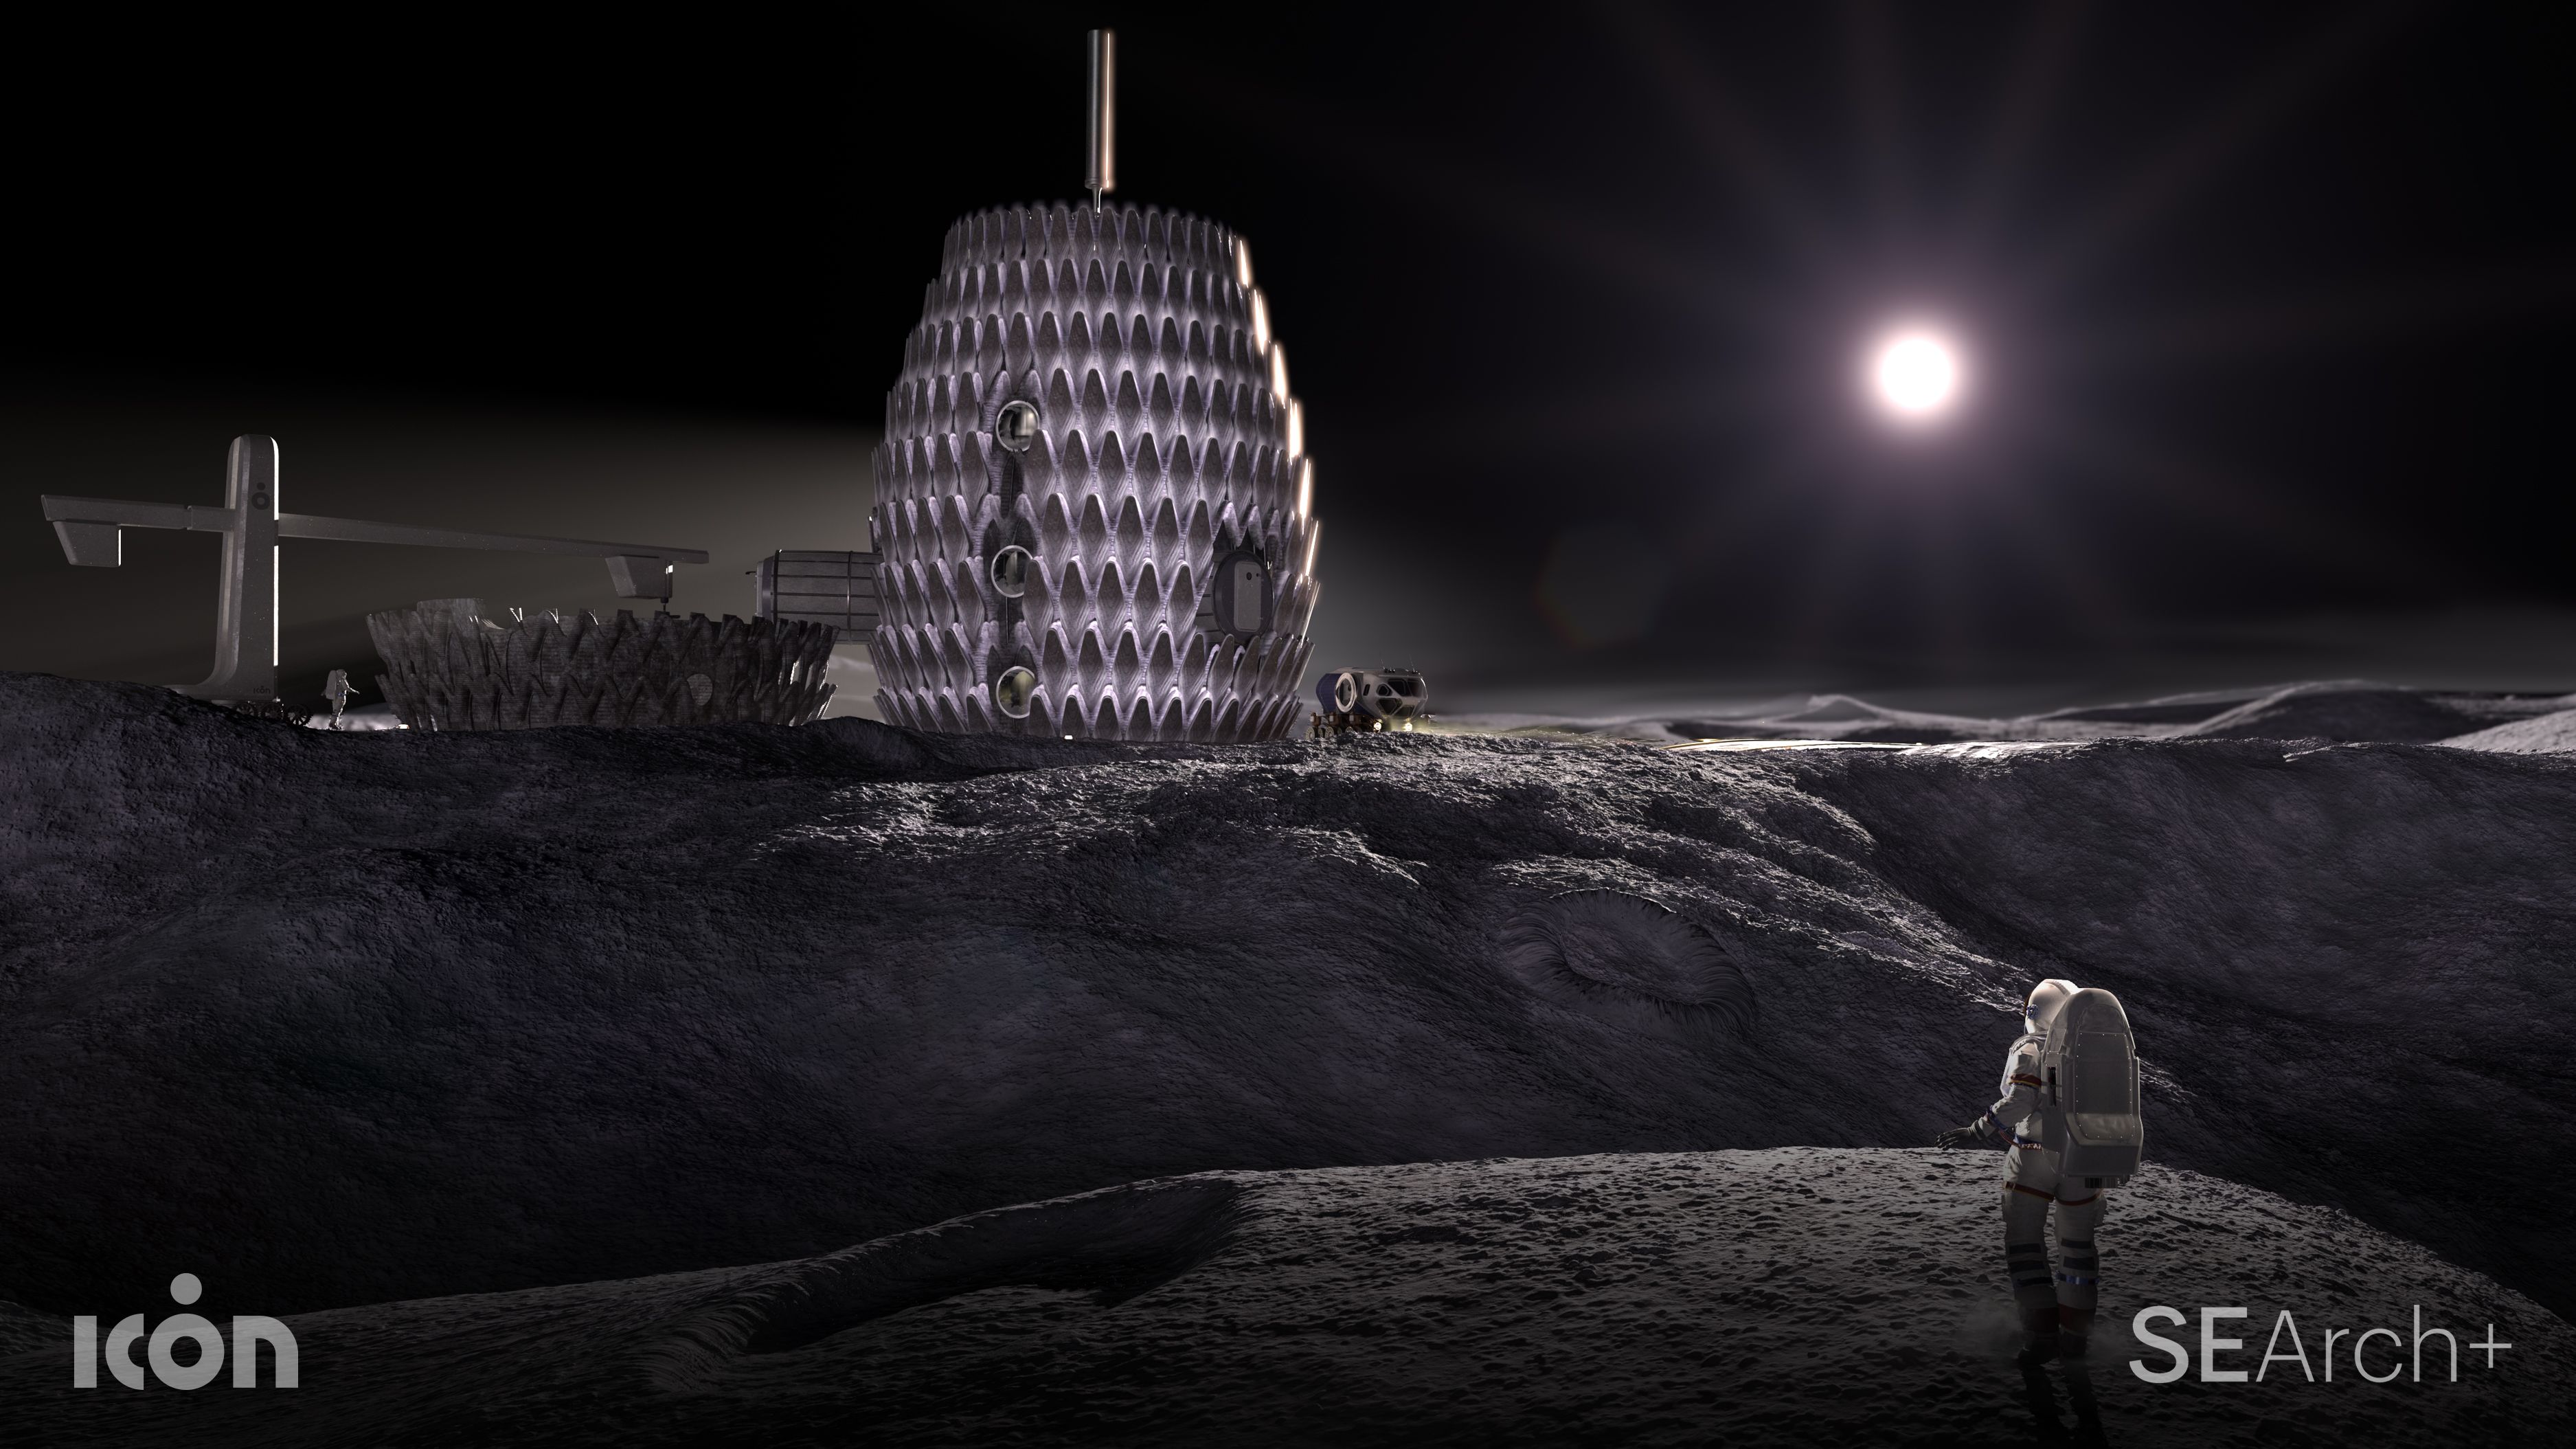 NASA wants to build a lunar base by 2030. Could 3D printing with